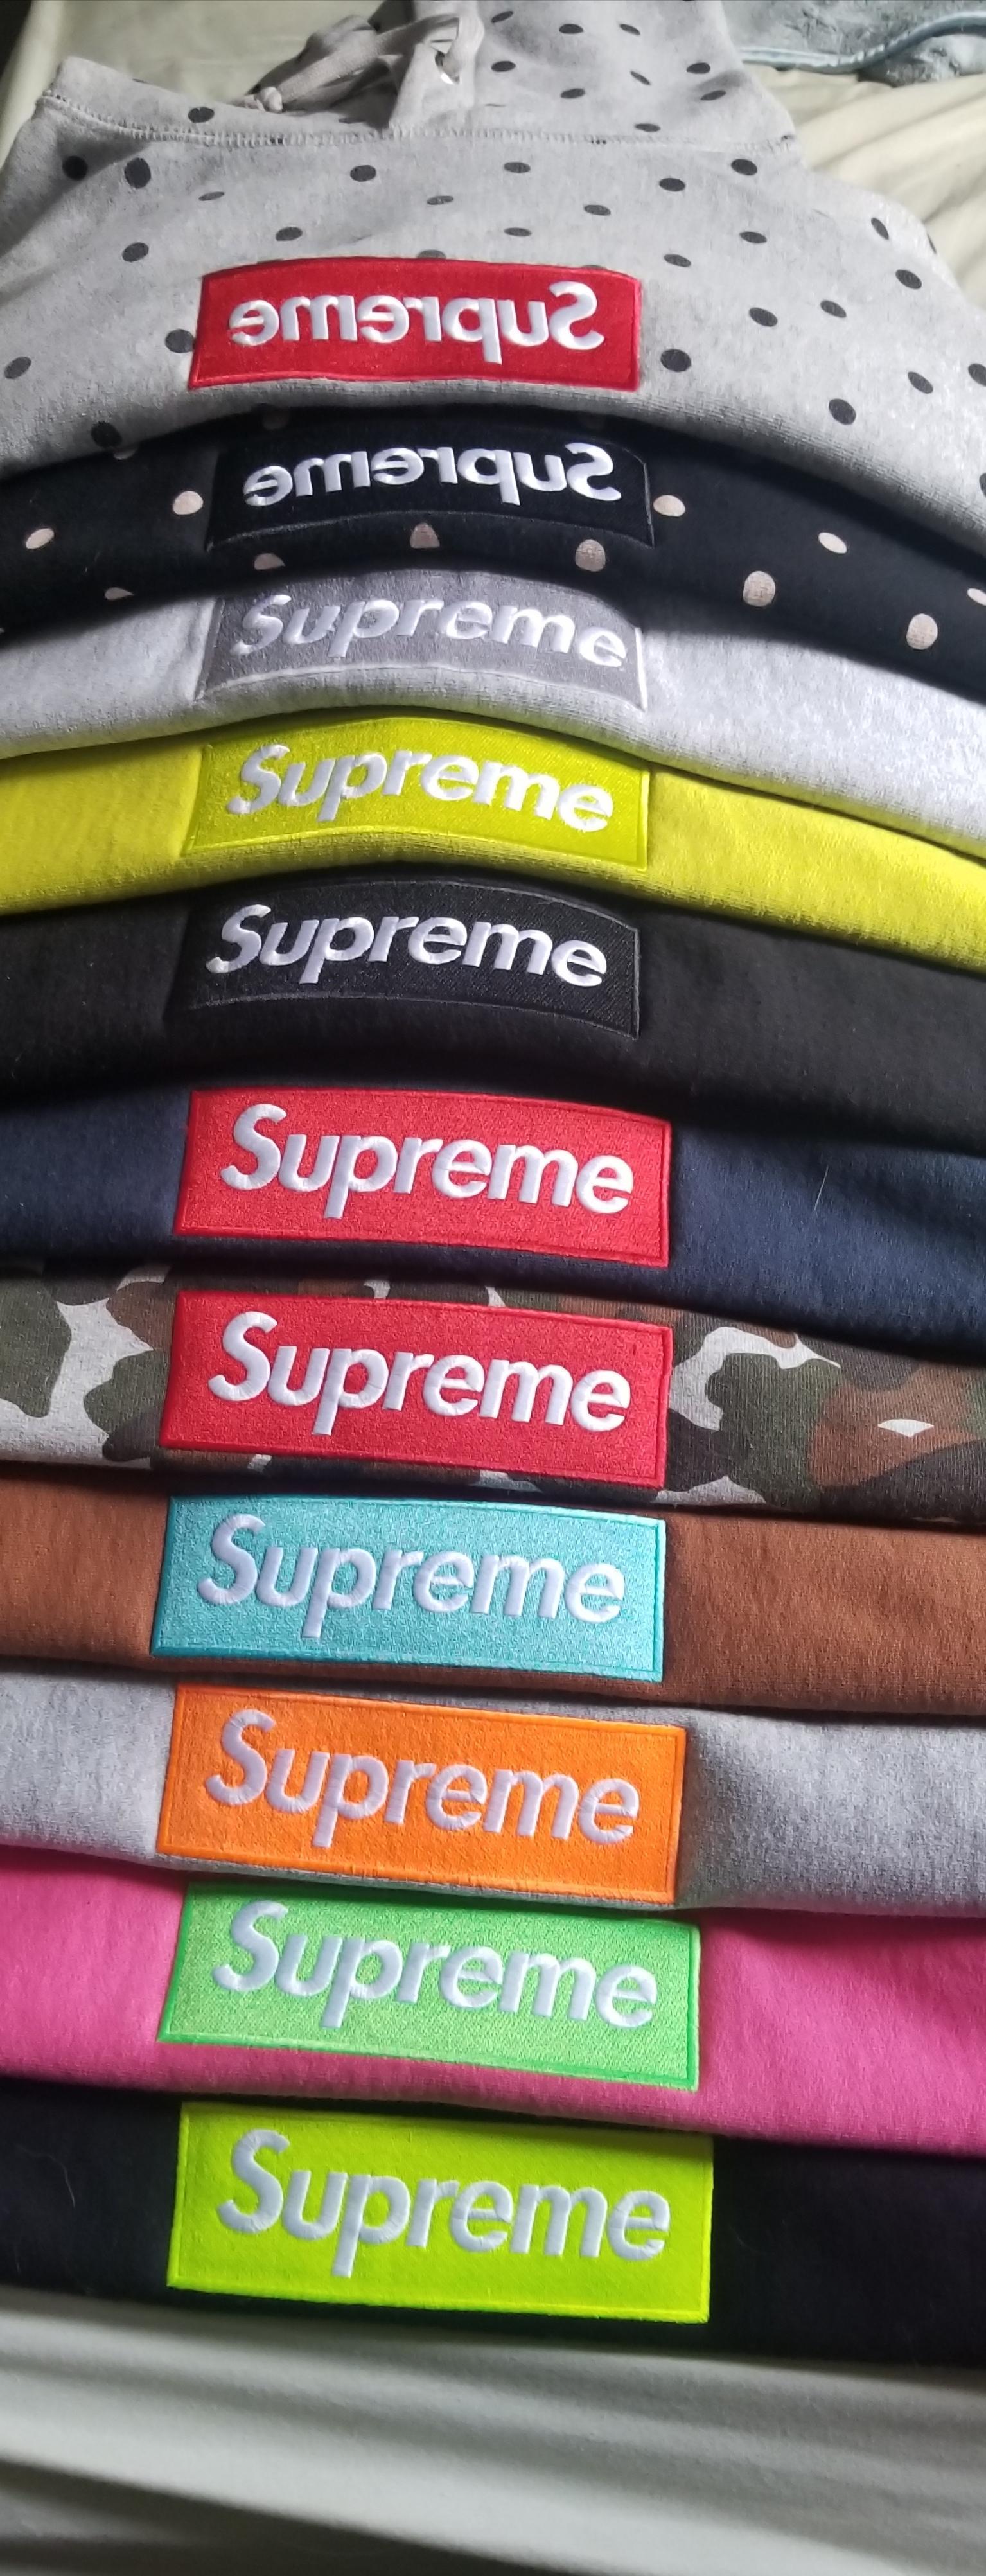 Chill Its Fake Supreme Logo - My recent Supreme Box Logo Hoodie Collection pic. : supremeclothing